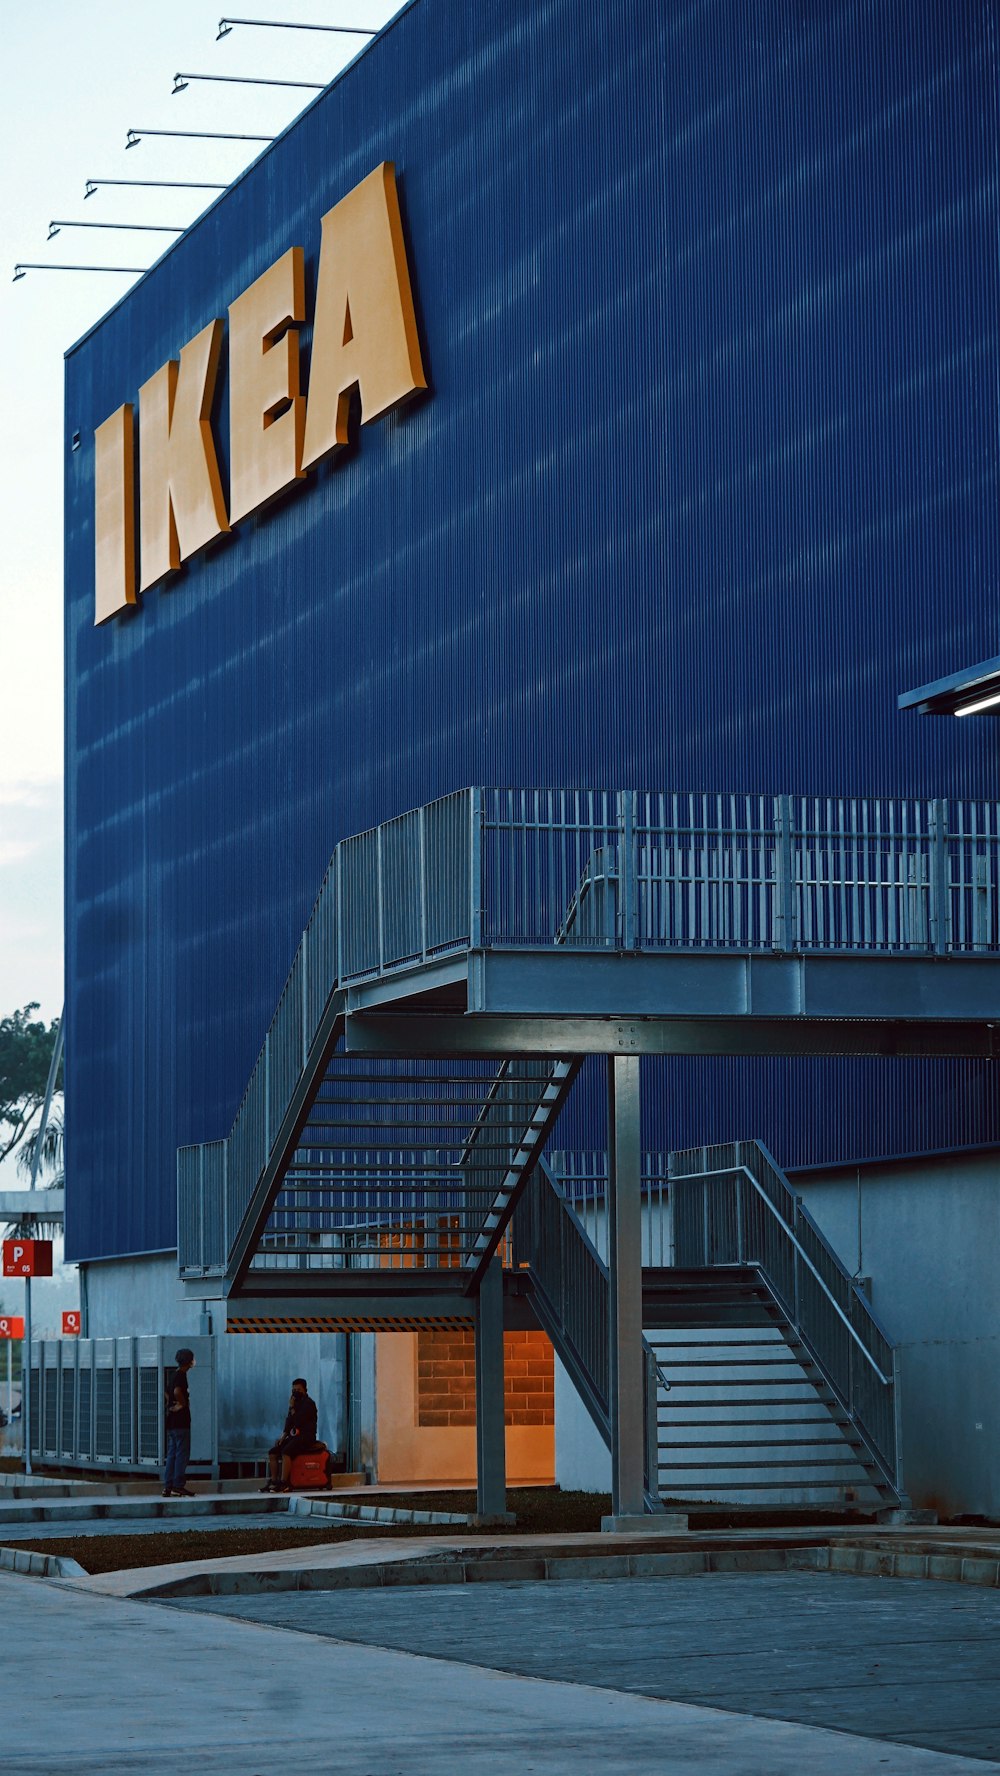 550 Ikea Pictures Download Free Images On Unsplash